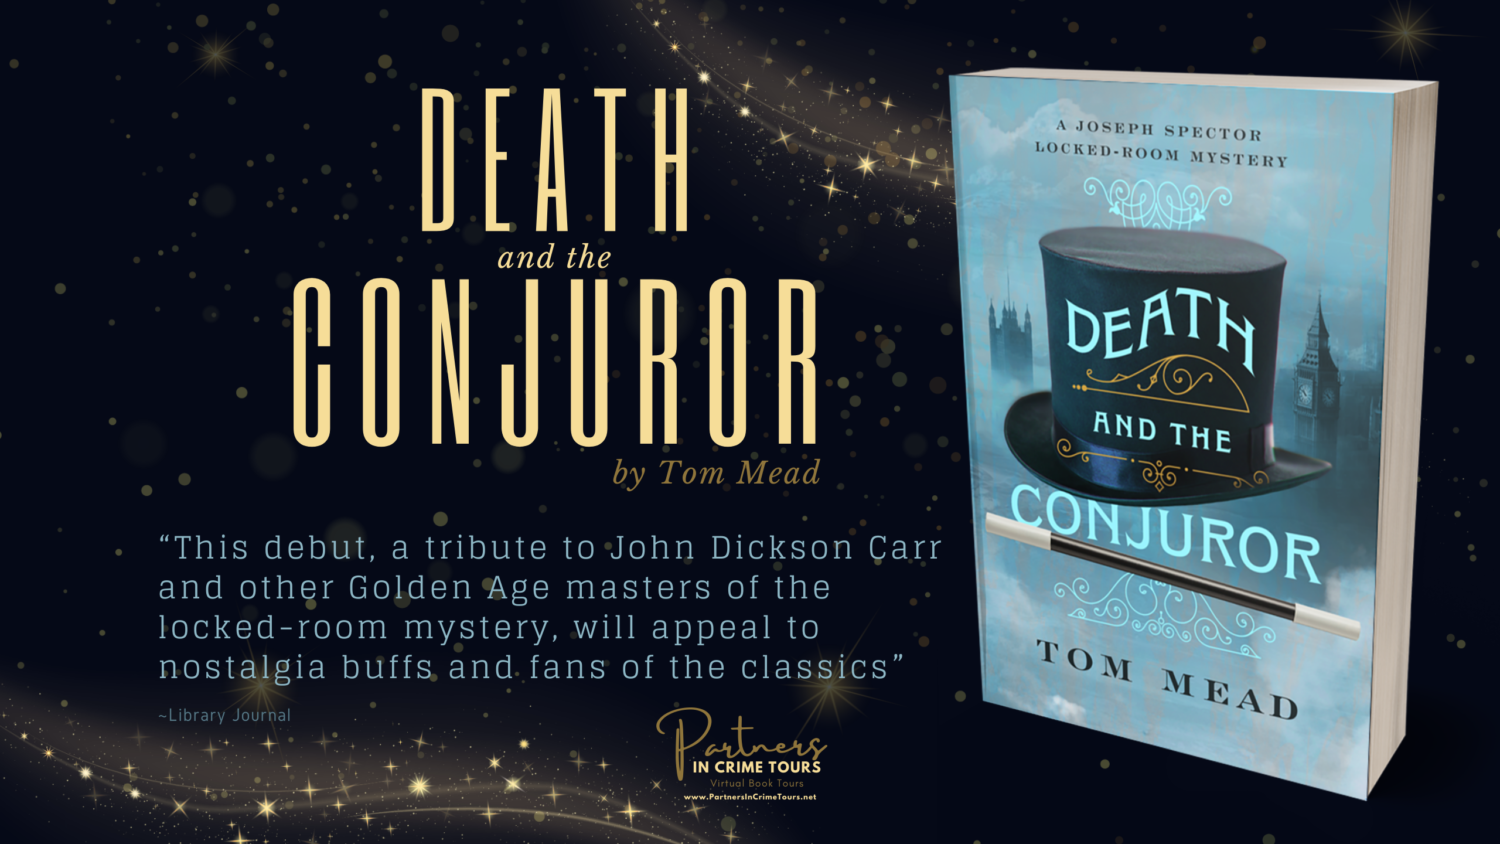 You are currently viewing Theatrical Murder Mysteries: Death & the Conjuror